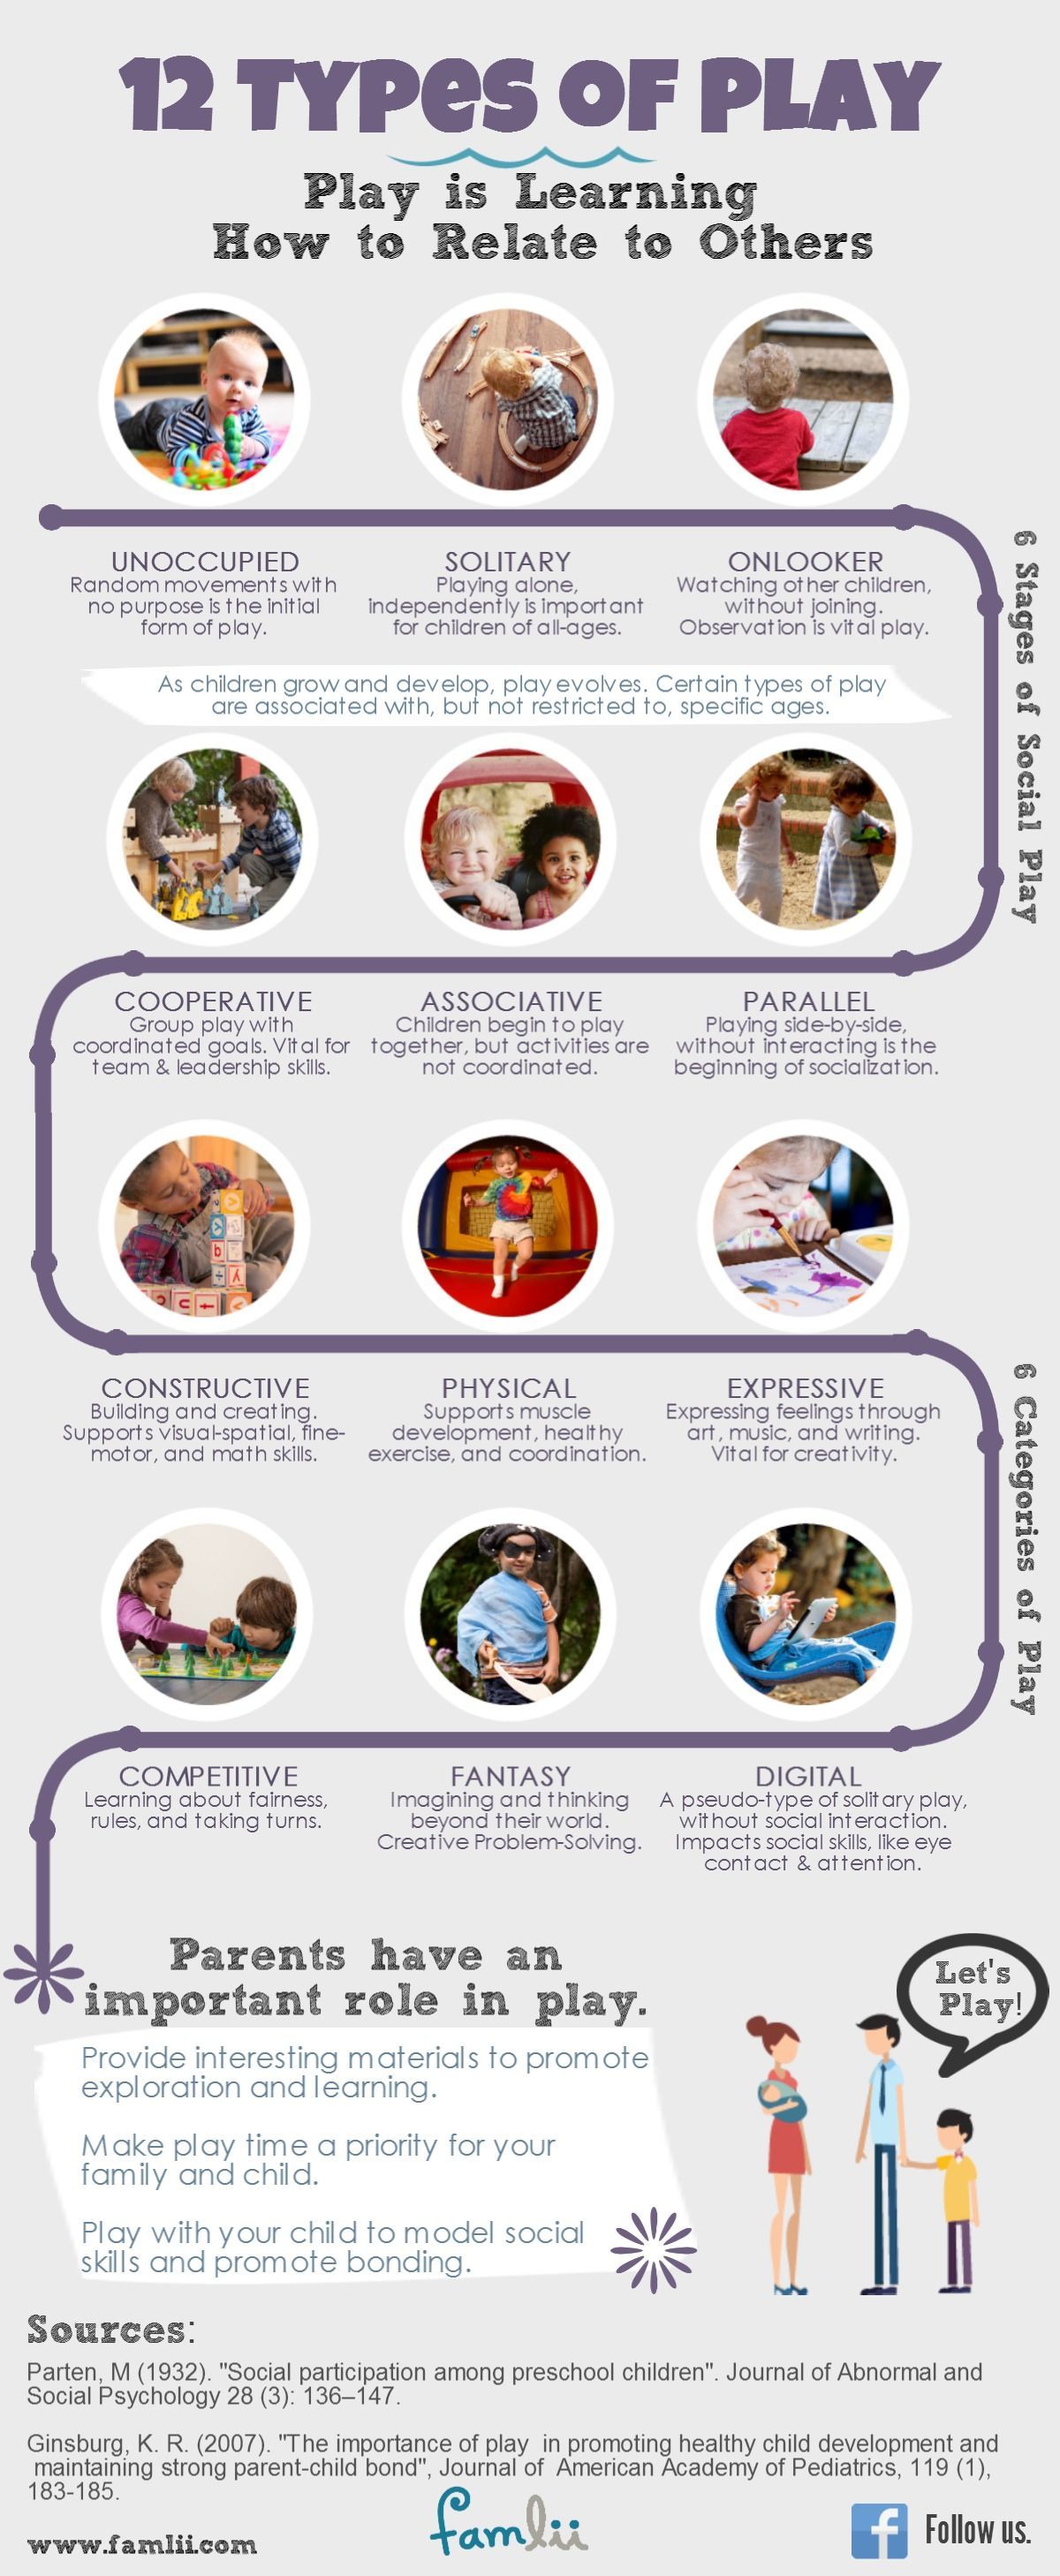 Parten's 6 Social Stages of Play and Why They Are Important